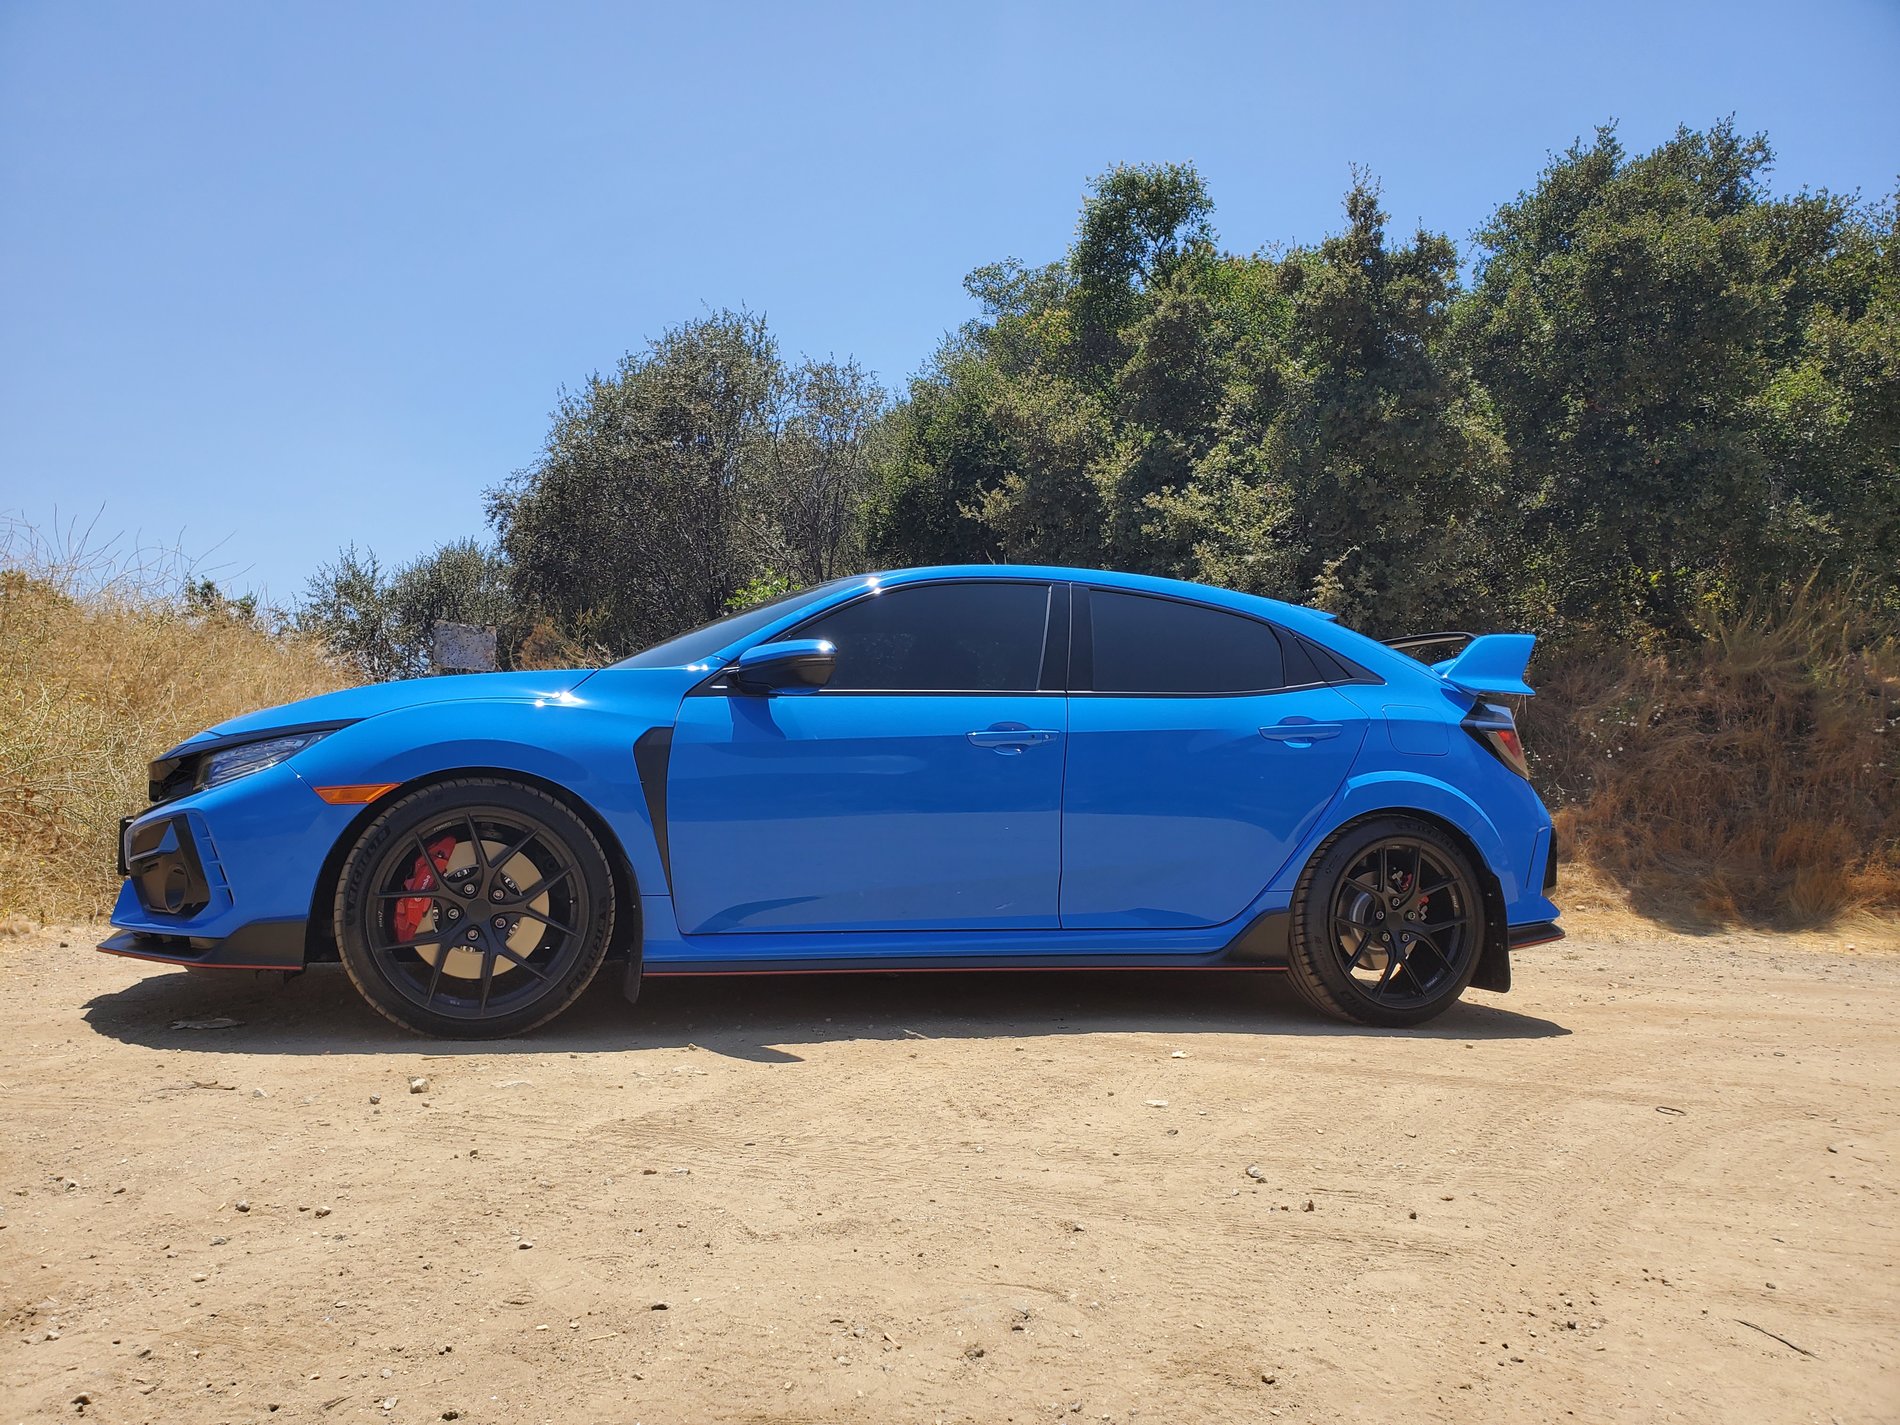 Honda Civic 10th gen Official 2020 Boost Blue Type R Picture Thread 20200627_132424